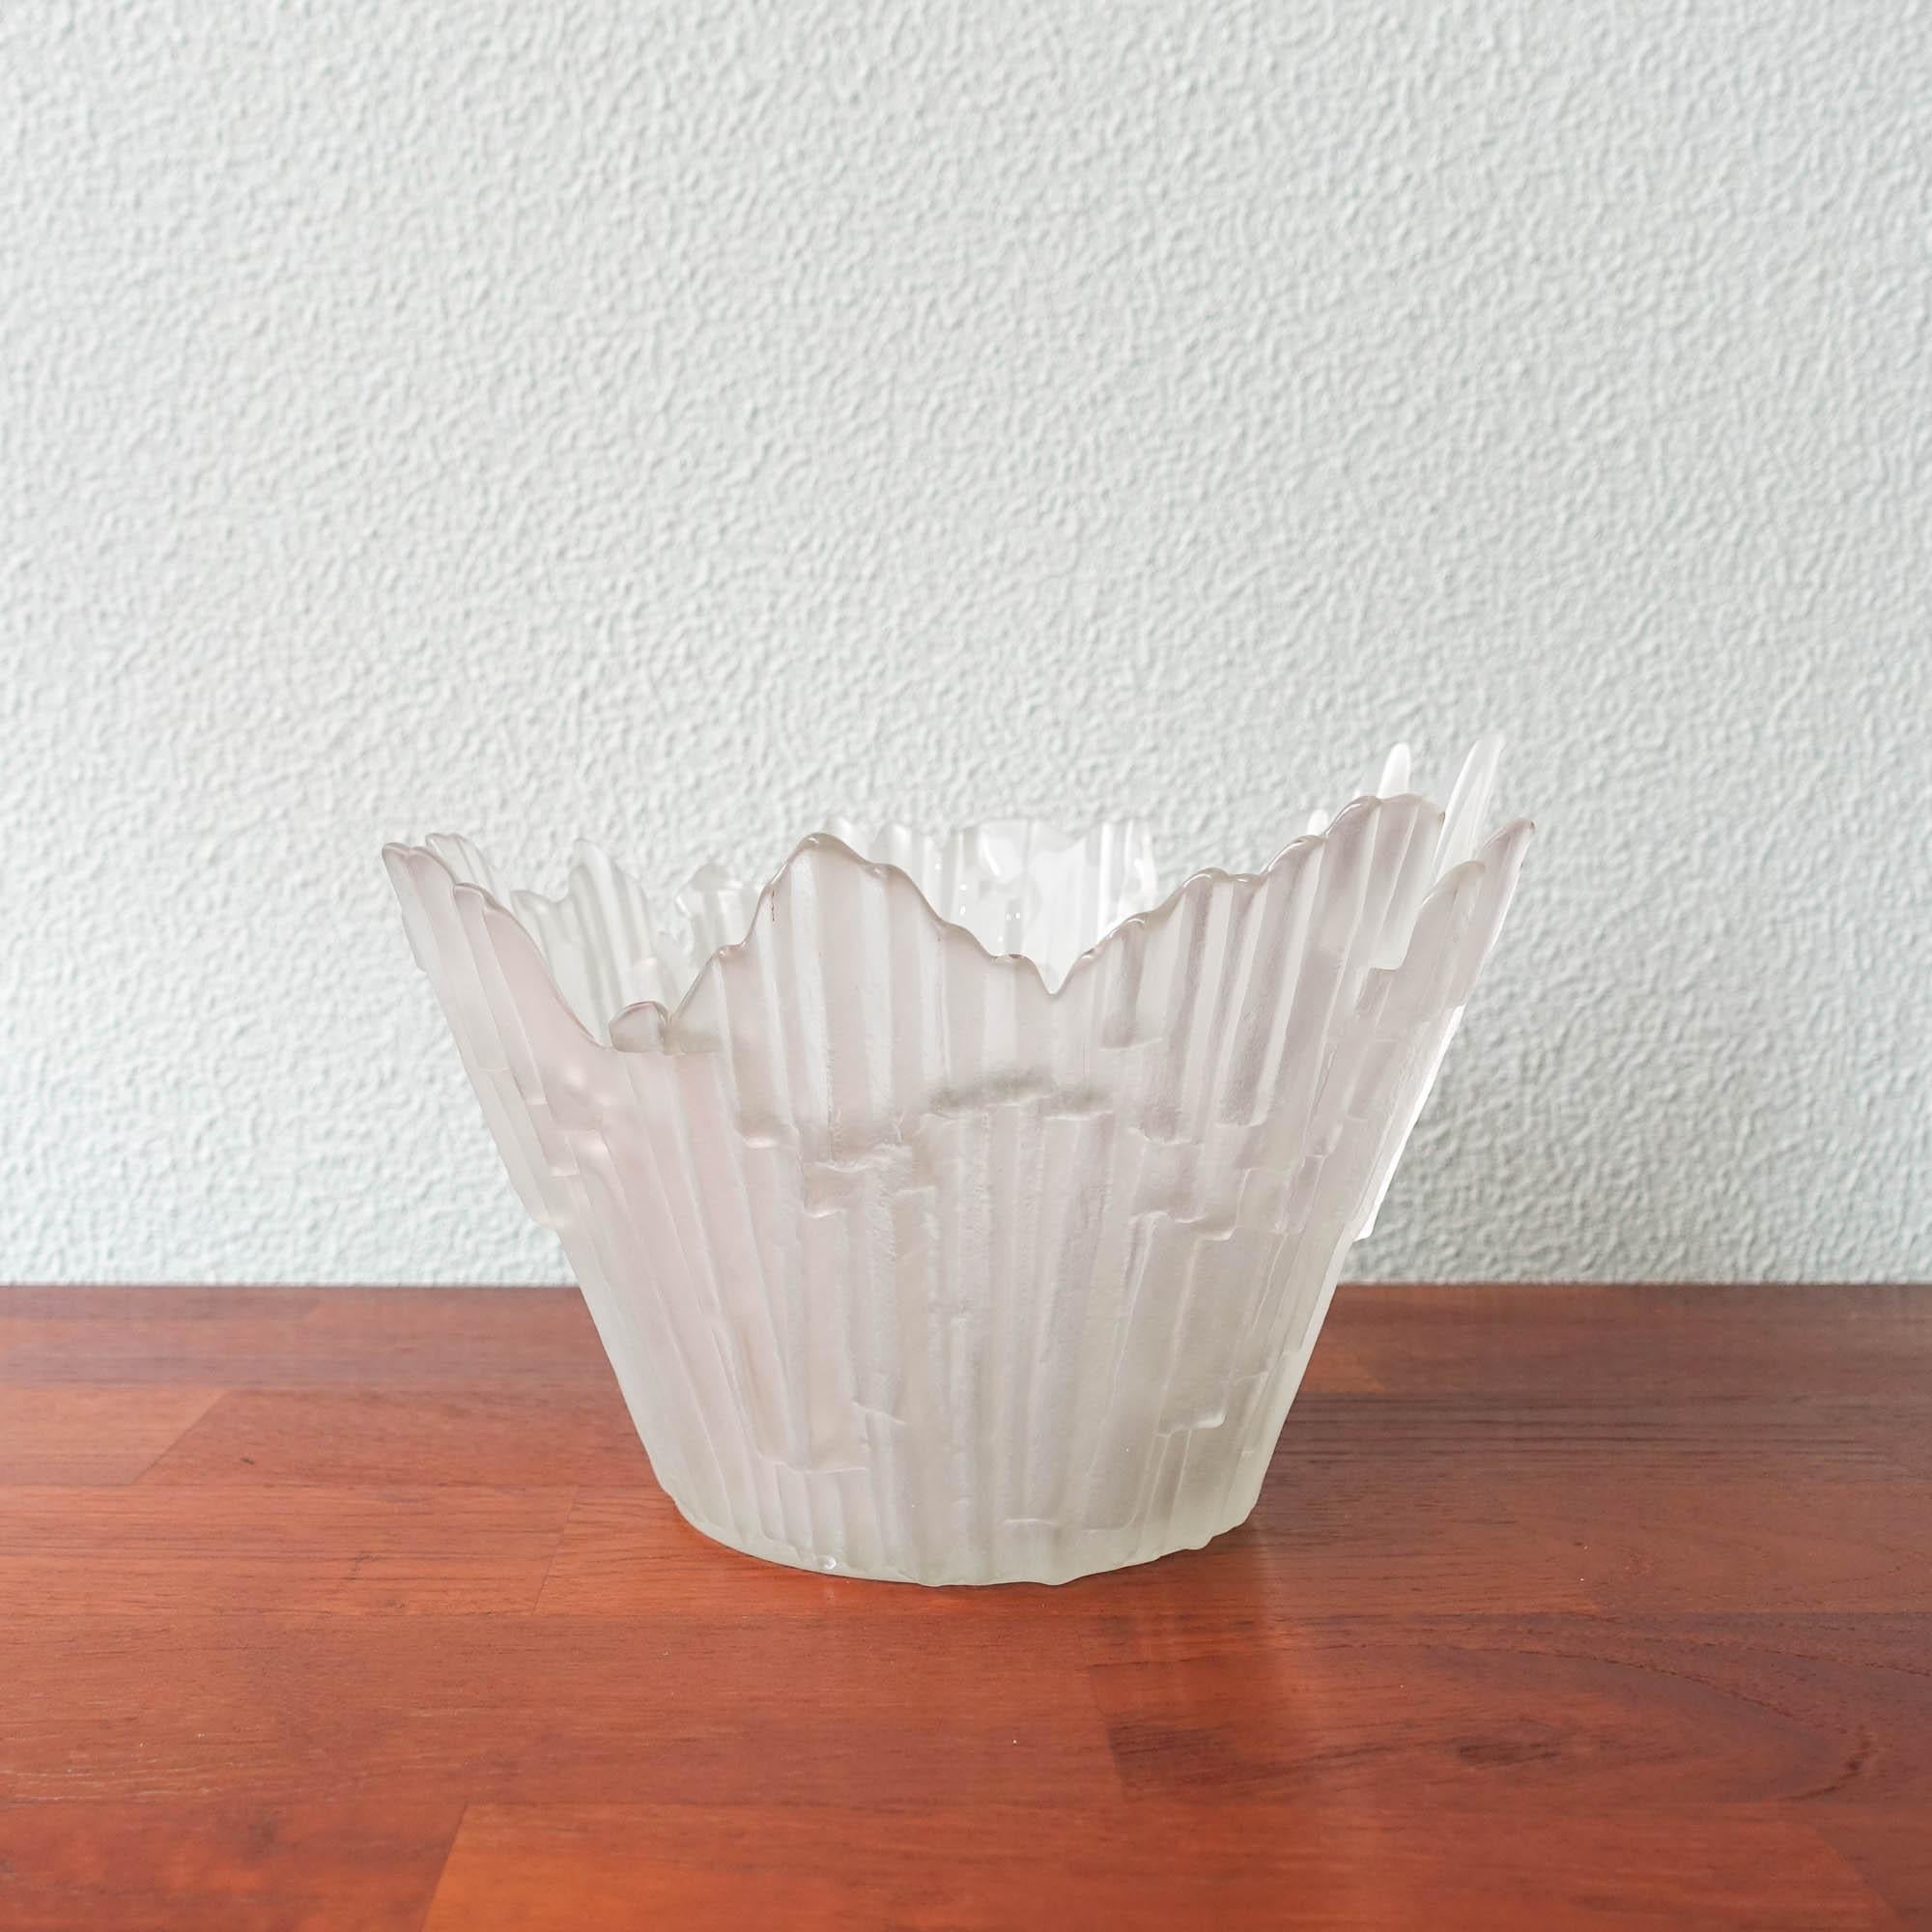 This glass bowl was designed by Tauno Wirkkala for Humpila Glass of Finland in 1972 and in production between 1972 and 1987.
Tauno Wirkkala is brother of famous Finnish designer Tapio Wirkkala. This large size handmade frosted glass centerpiece